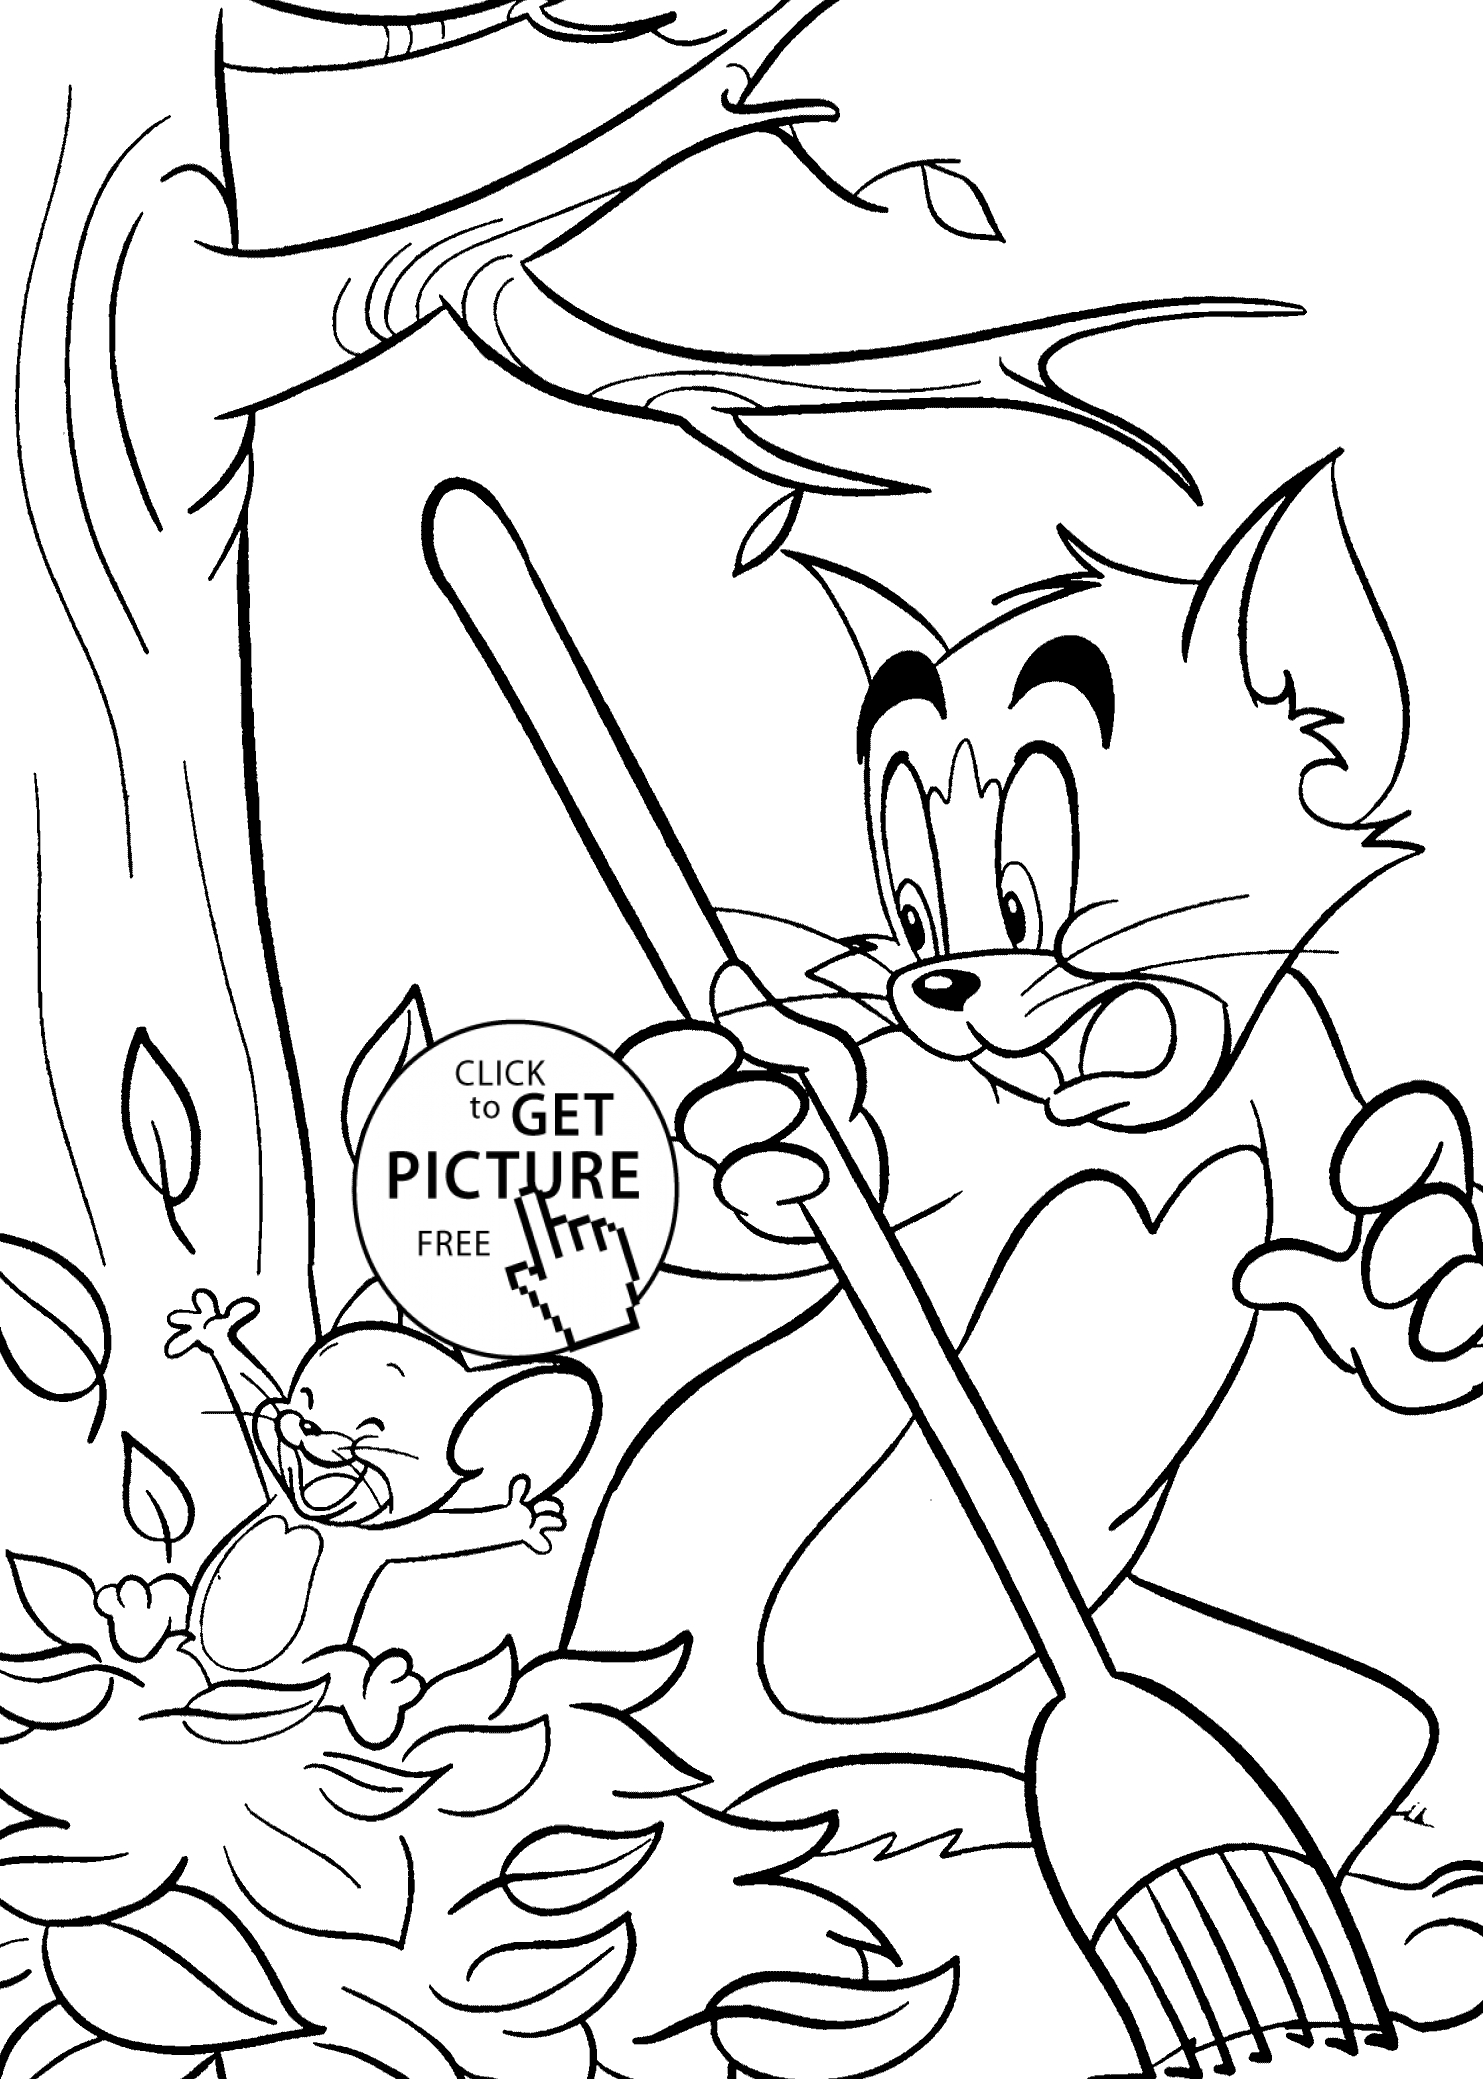 Fall Coloring Pages Free Tom And Jerry Fall Coloring Pages For Kids Printable Free